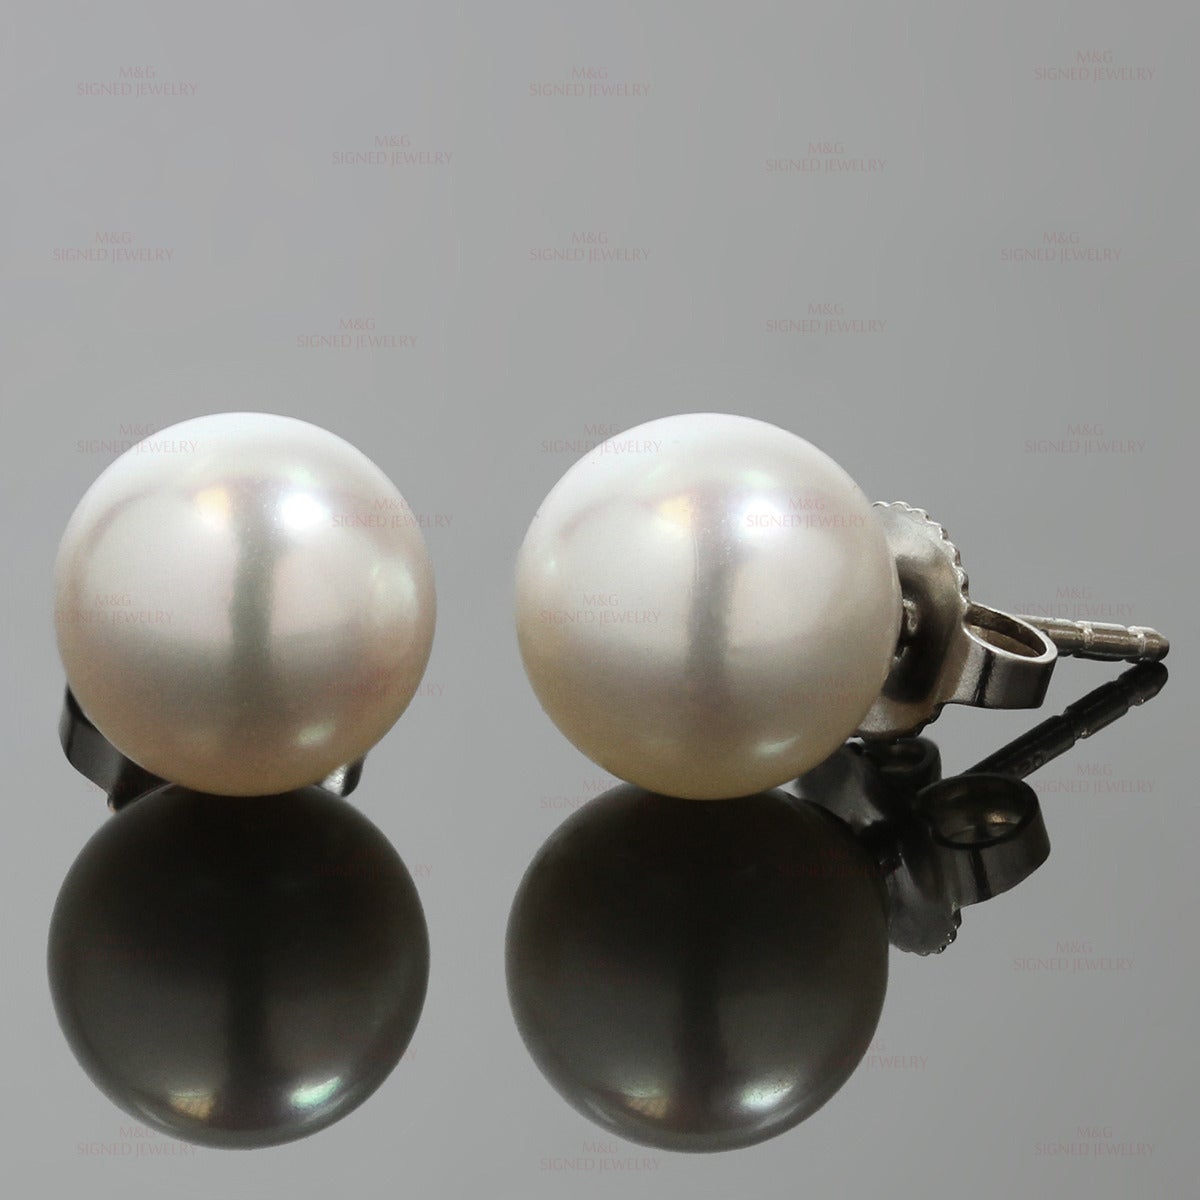 Lovely modern stud earrings from the Signature collection by Tiffany & Co. Made in 18k white gold and set with 8.5mm - 9.0mm cultured Akoya pearls. Circa 2014. Measurements: 0.35